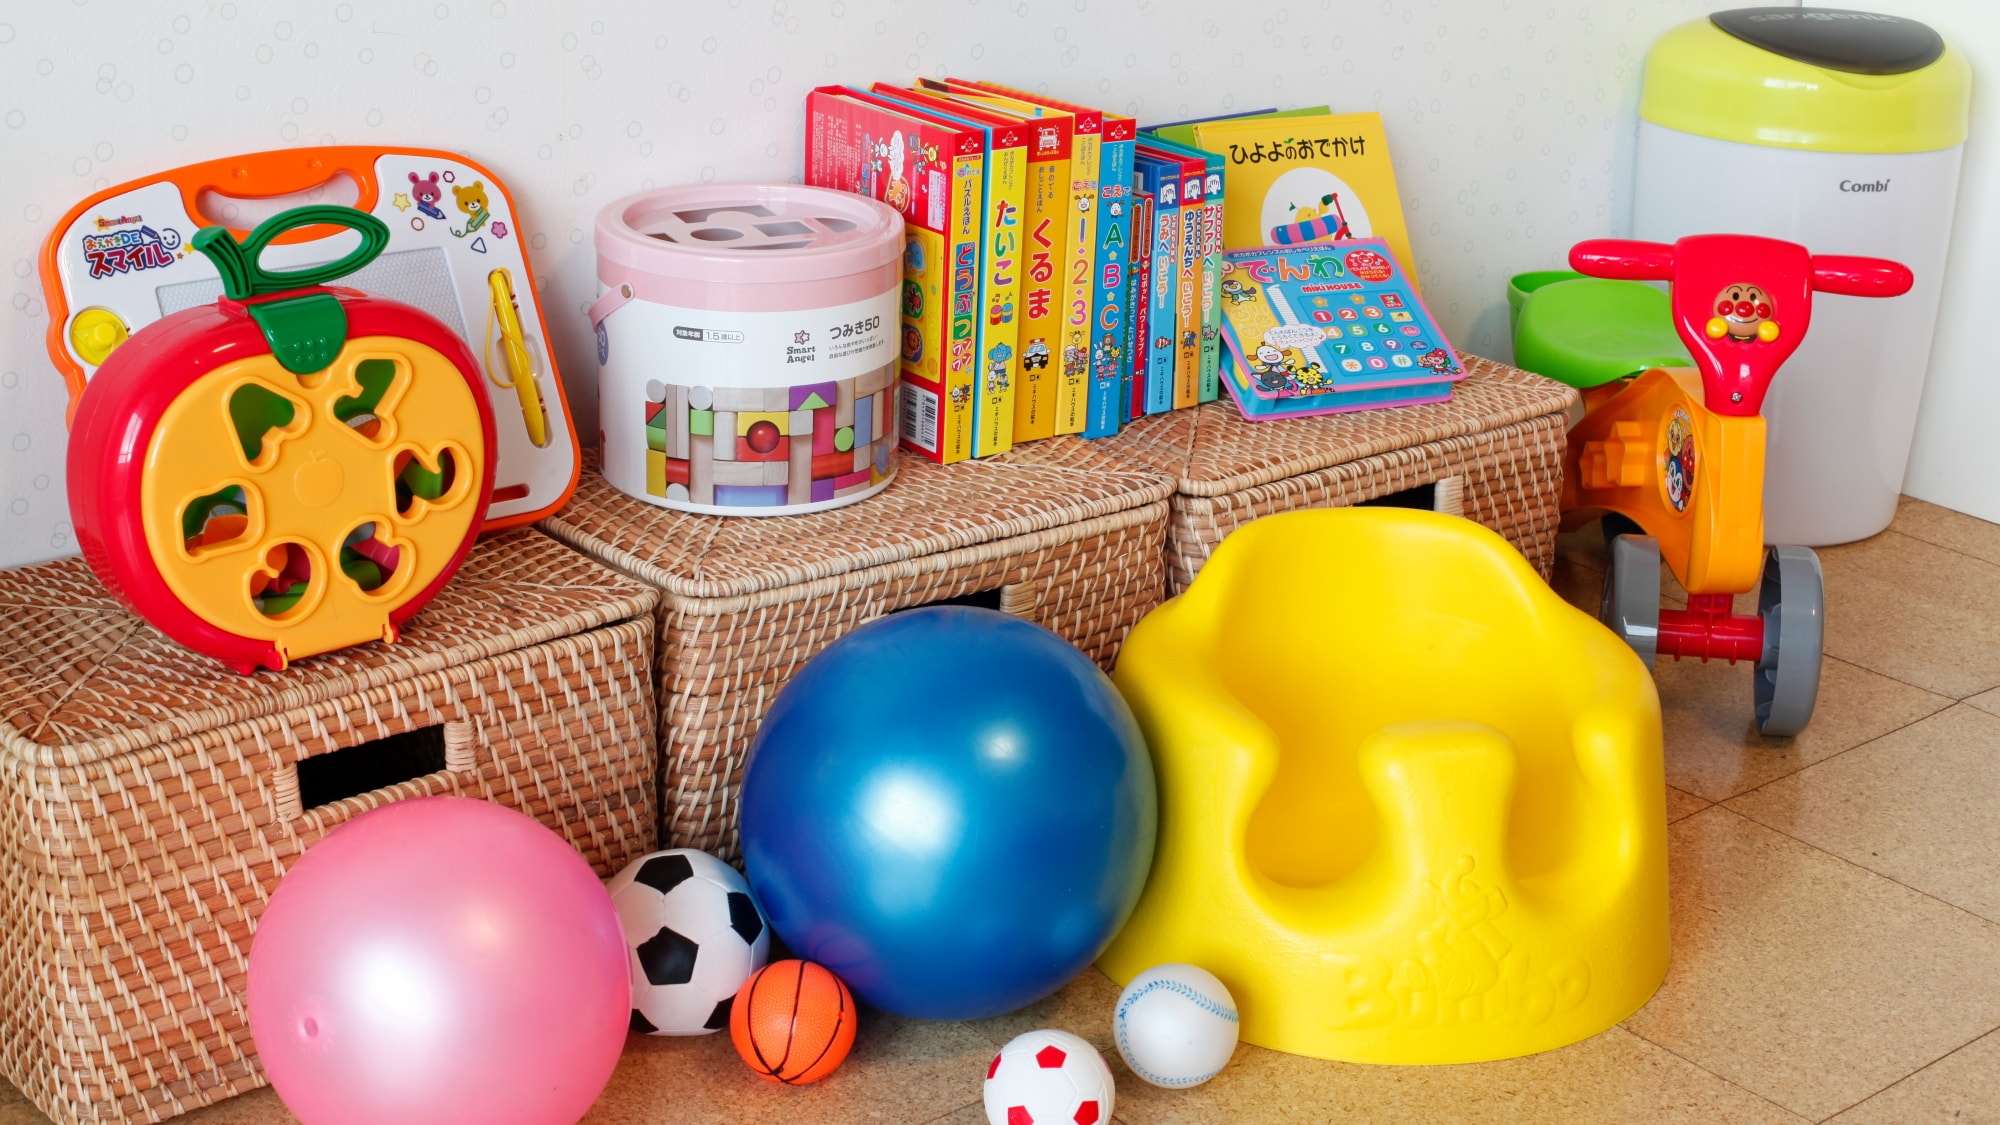 We have toys, picture books, etc. that children can enjoy (baby room "SORA~Sora~")